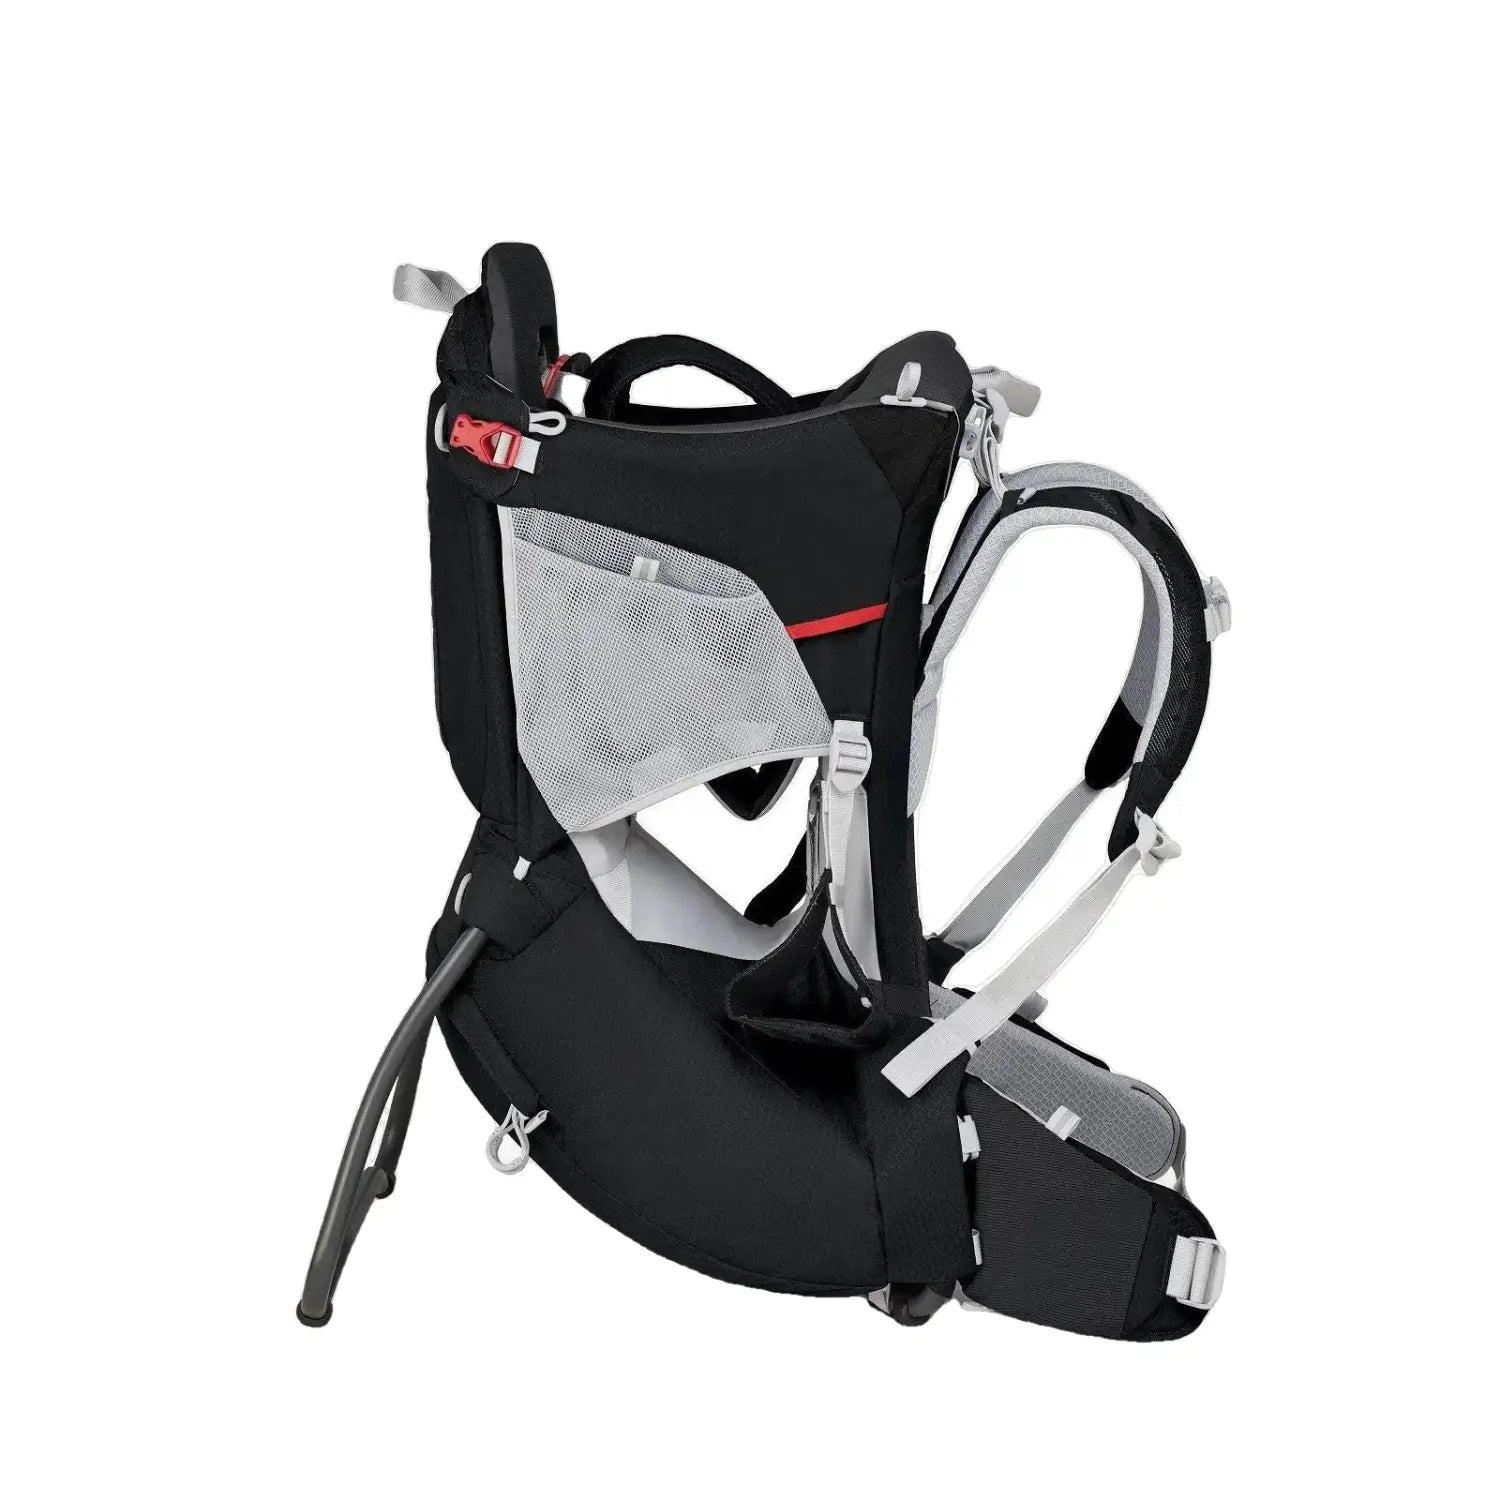 Osprey POCO® Child Carrier shown in Starry Black color option. Side view.